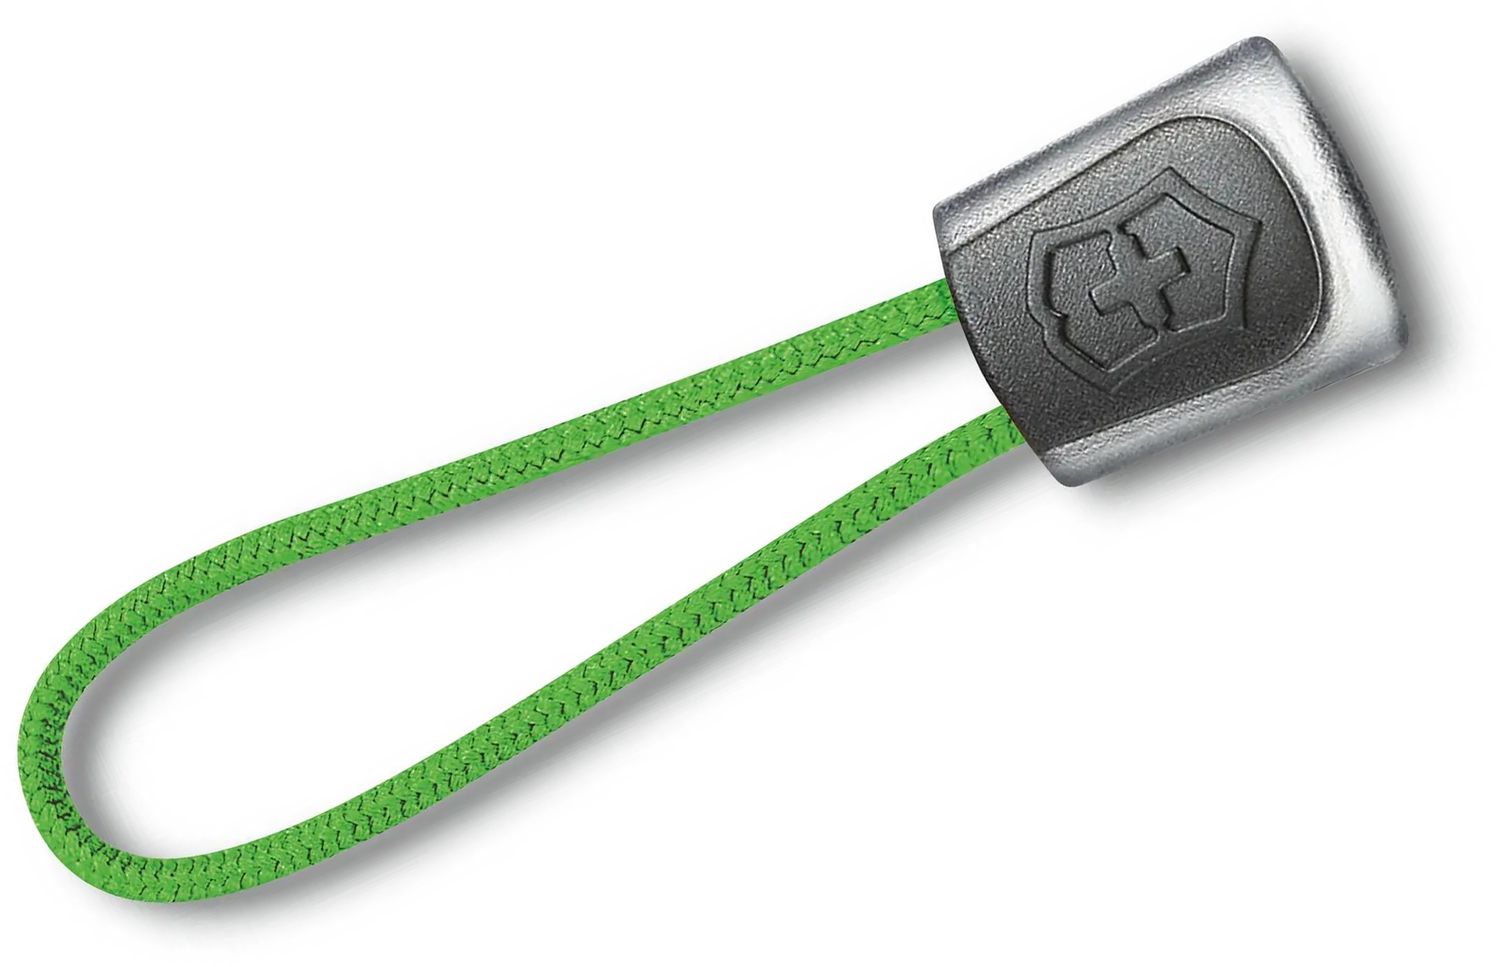 Victorinox Replacement Zipper Pull Green Nylon Cord with Rubber Grip Lanyard